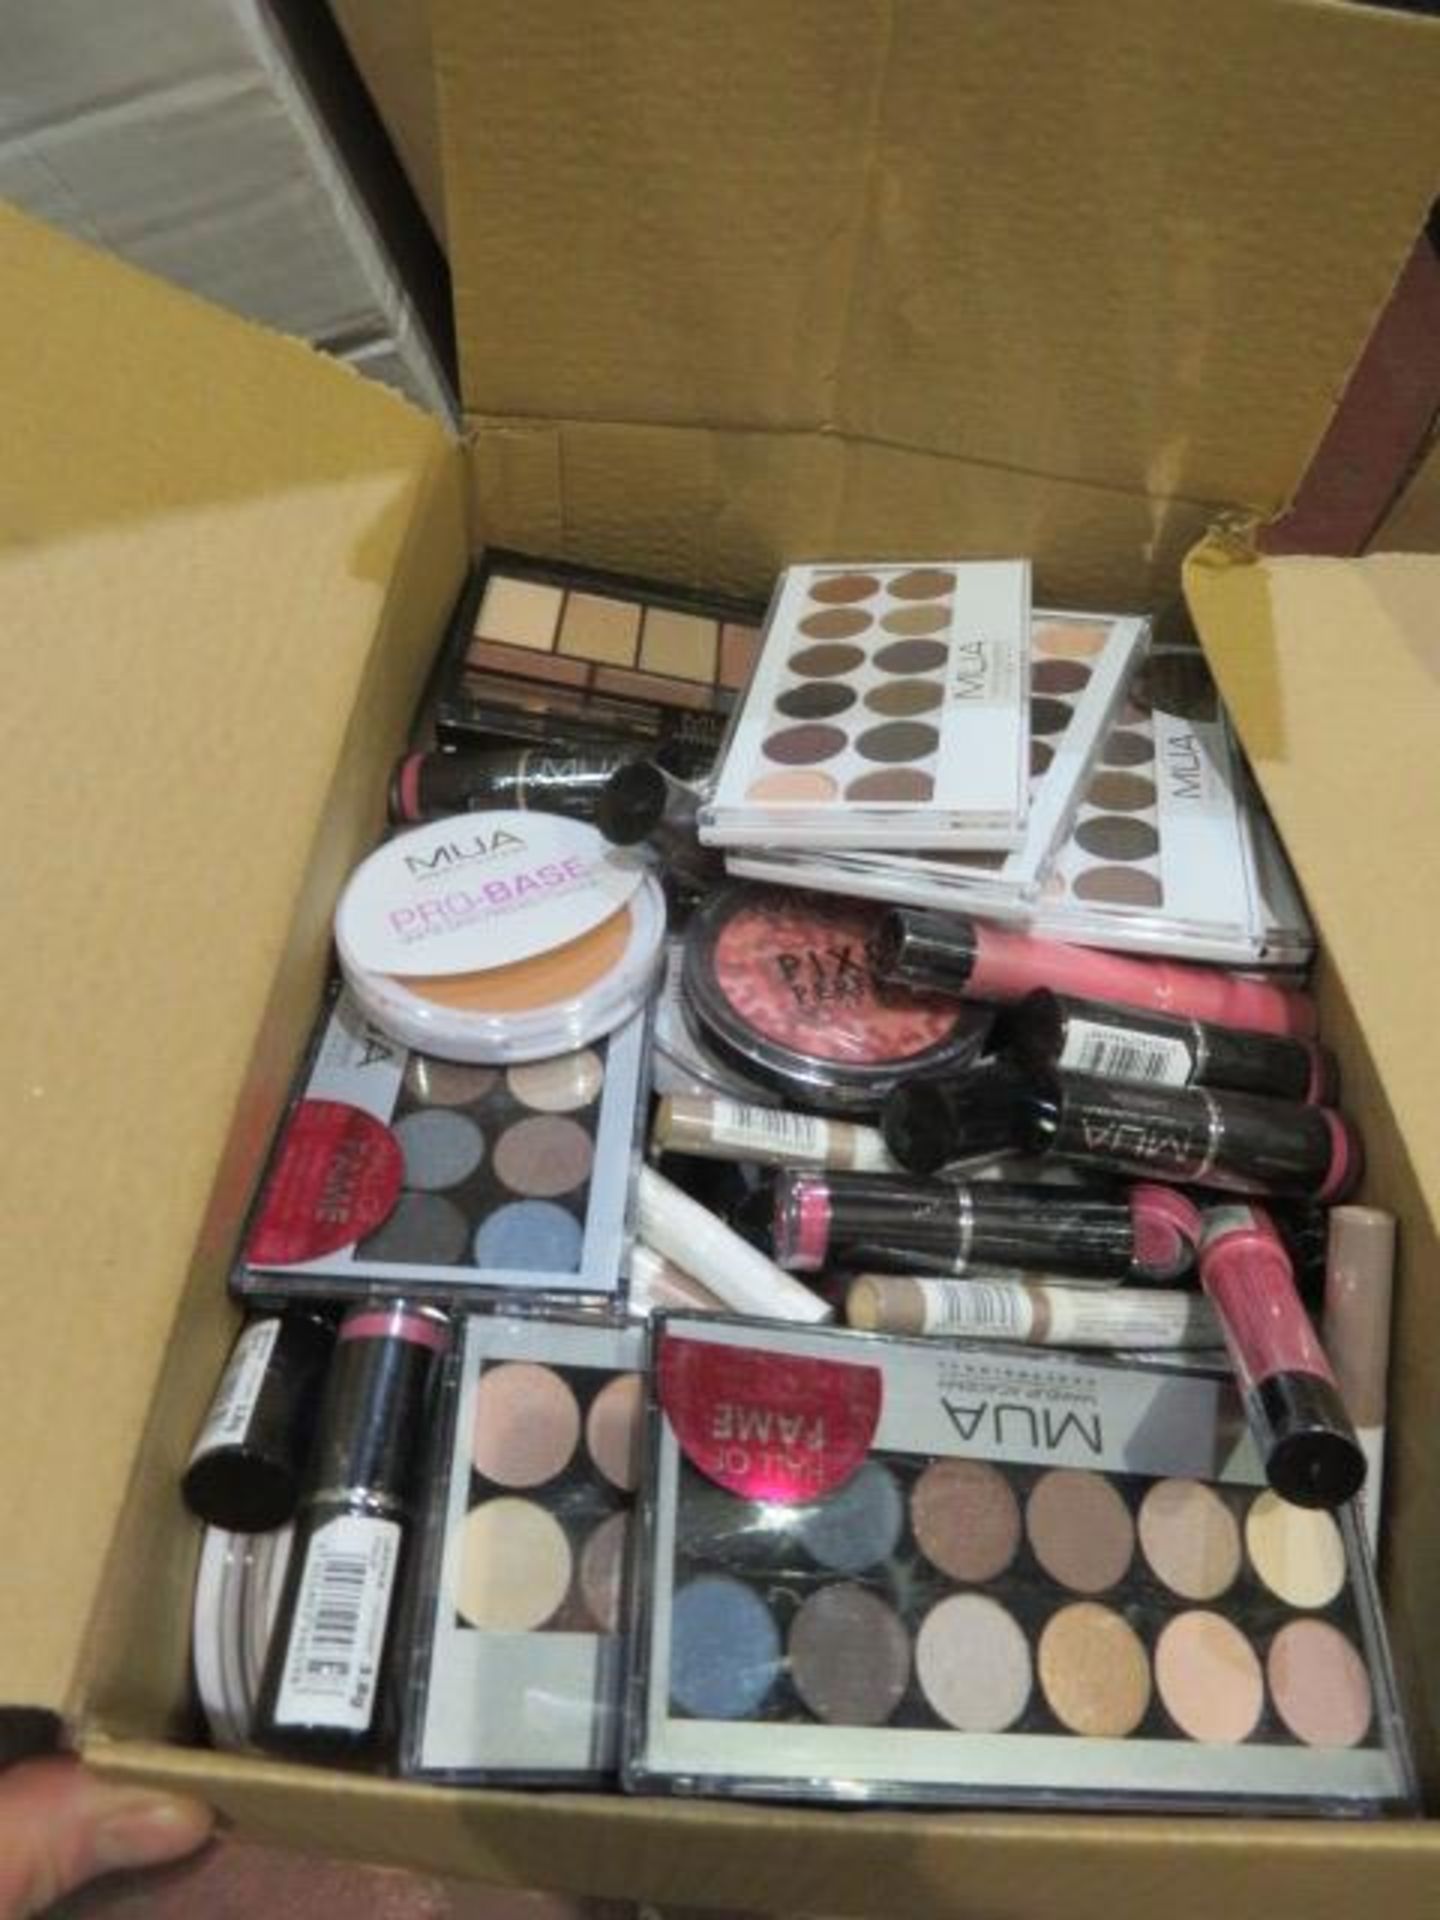 Circa. 200 items of various new make up acadamy make up to include: lipstick, probase pressed